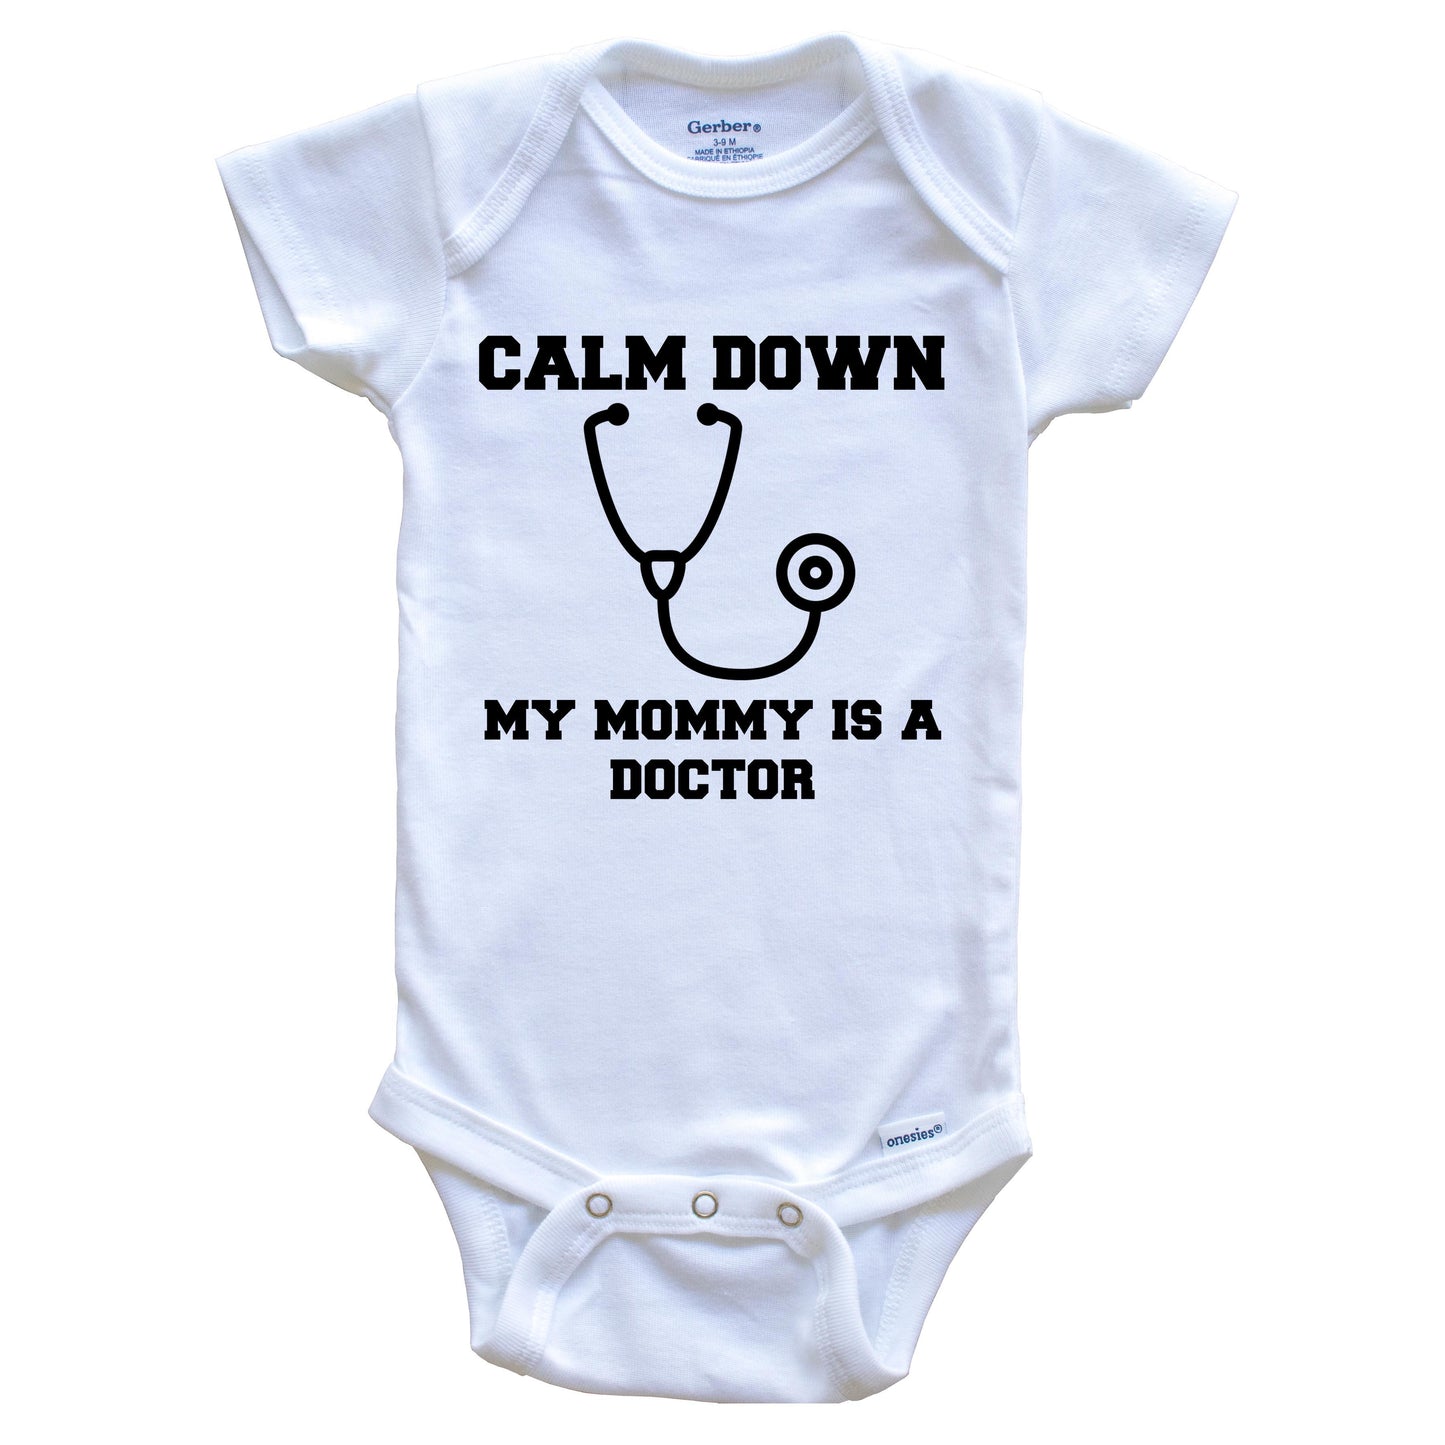 Calm Down My Mommy Is A Doctor Funny Baby Onesie - One Piece Baby Bodysuit